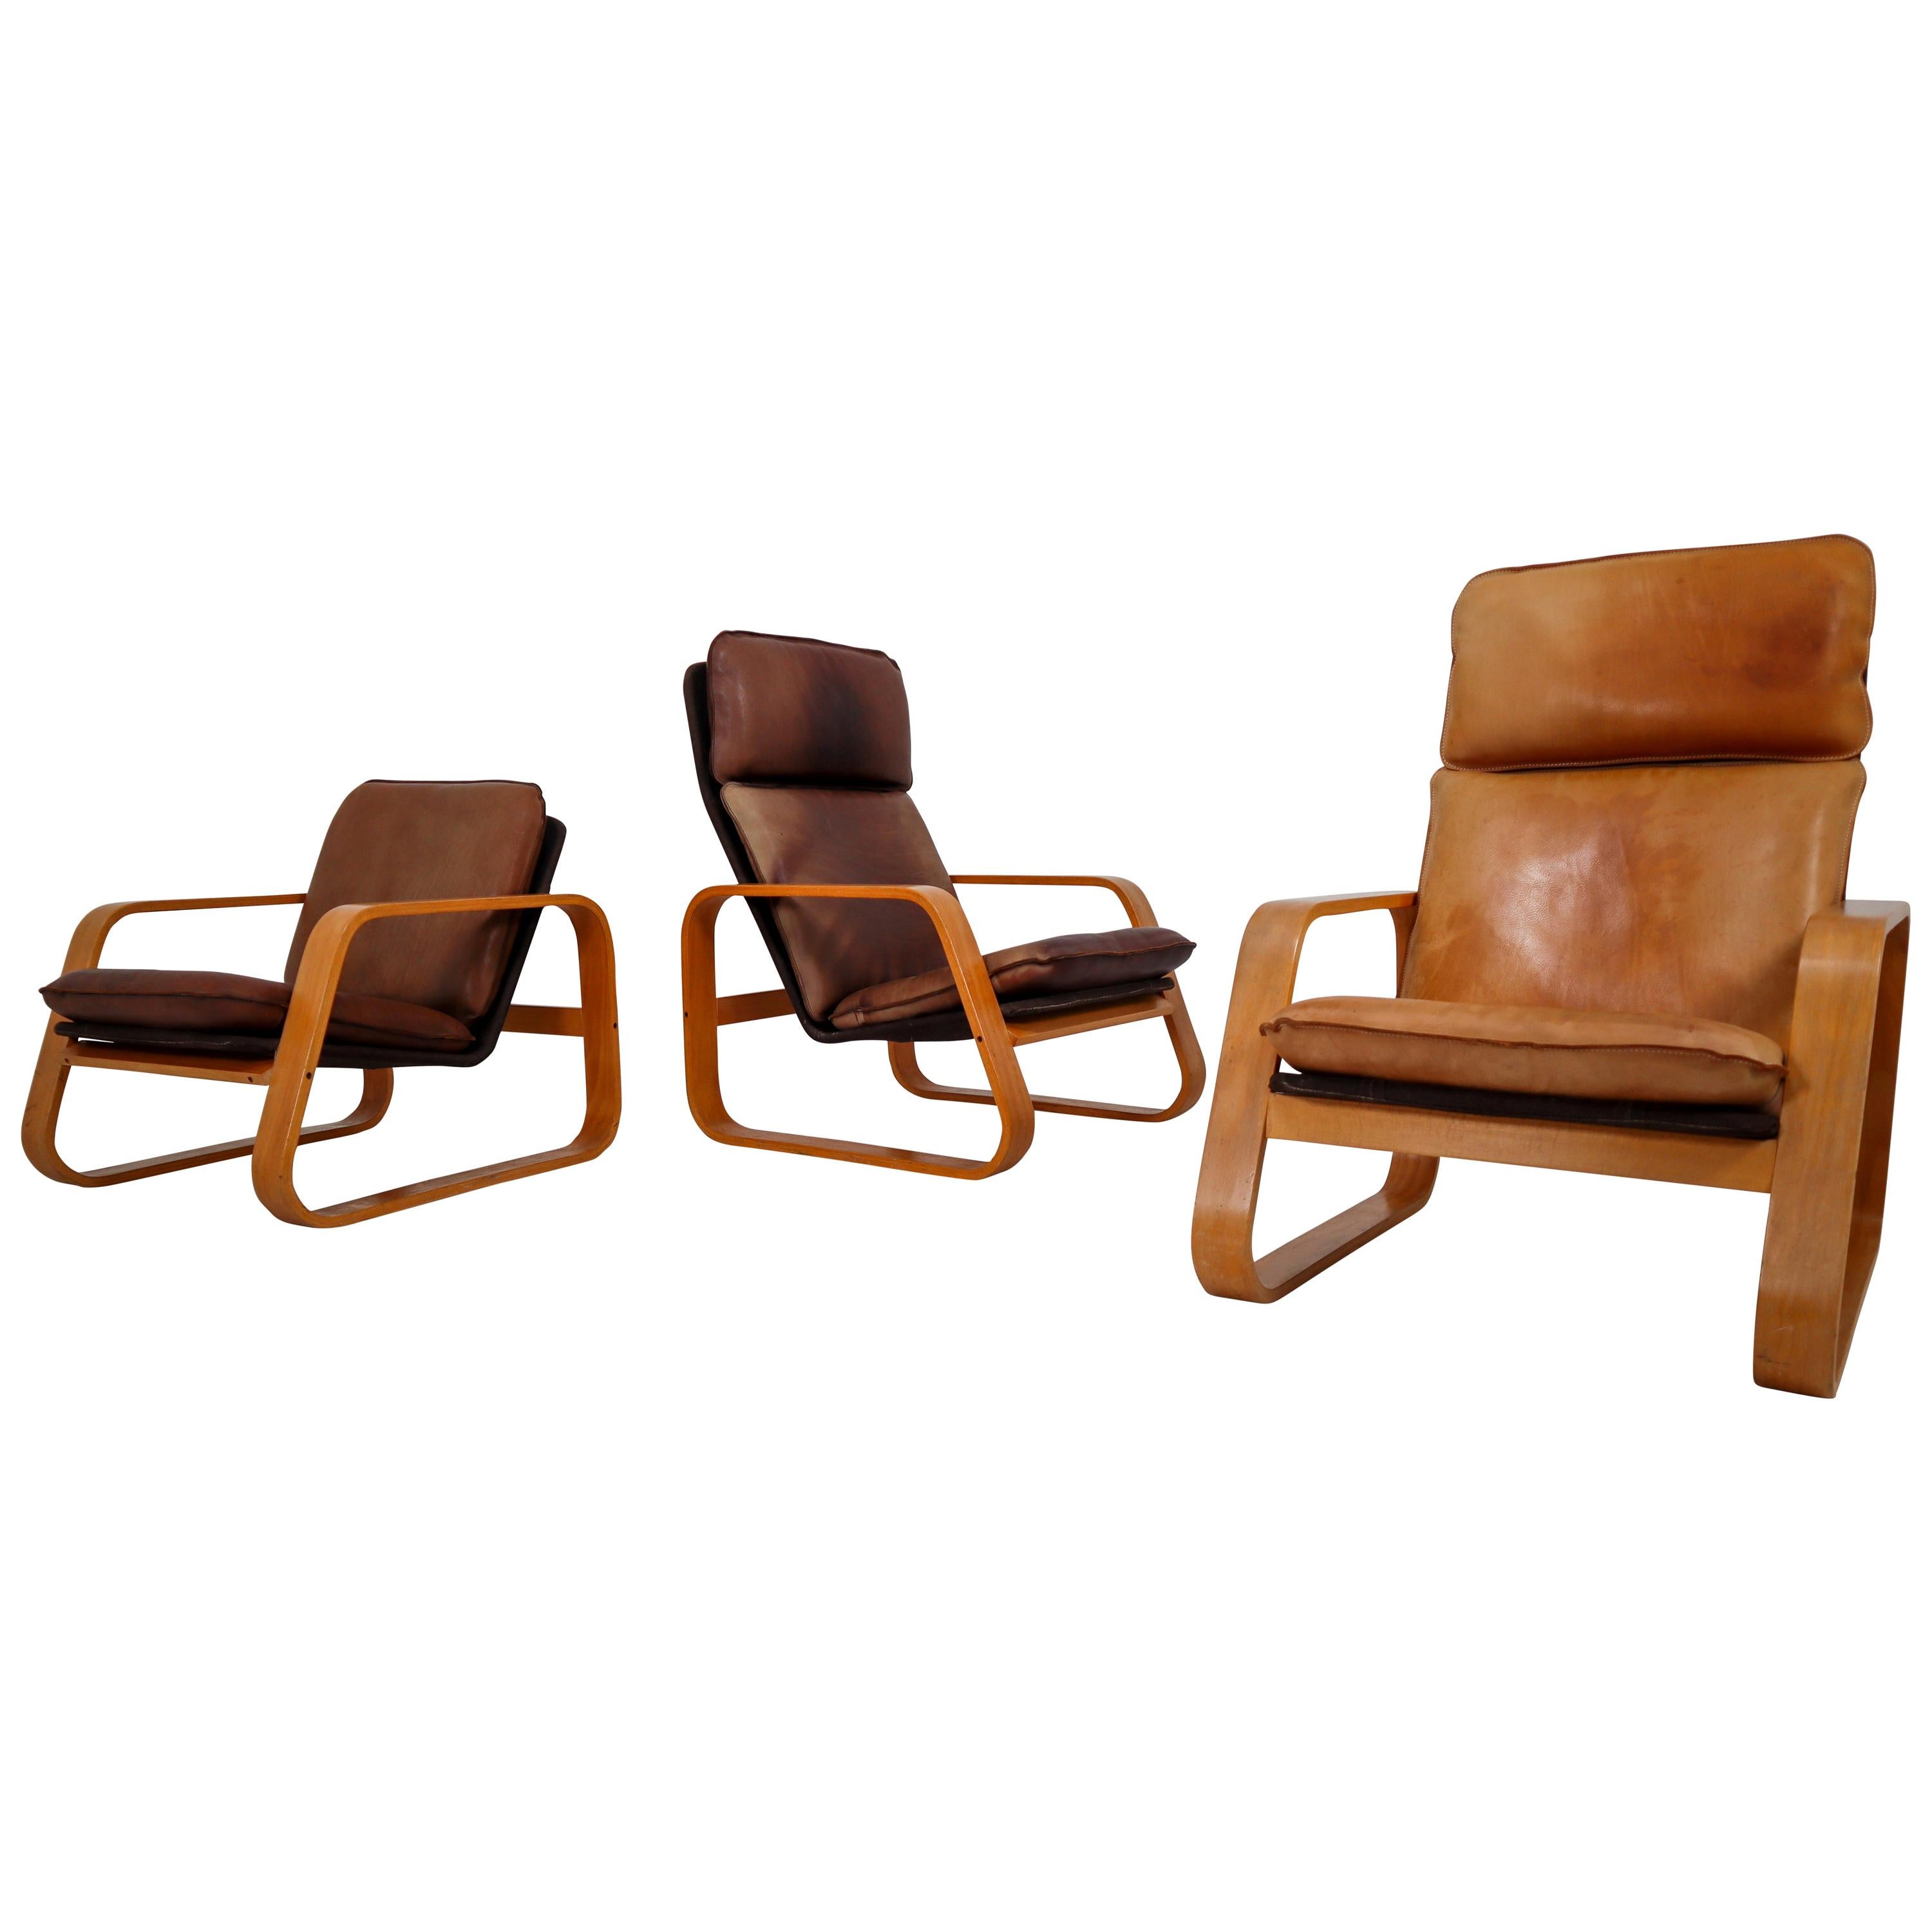 Set of Three Lounge Chairs, Patinated Leather and Bentwood, France, 1970s